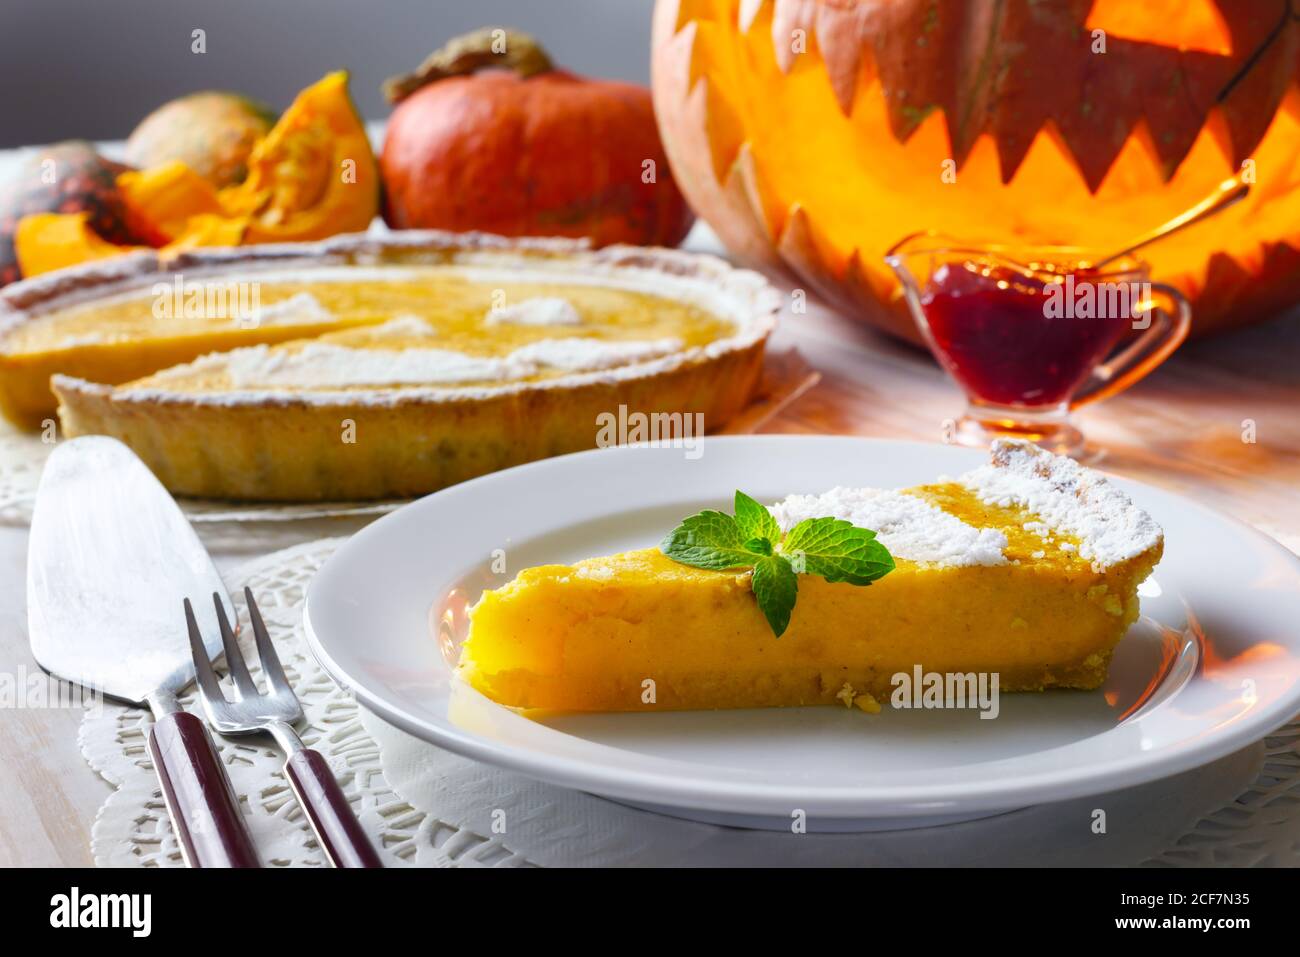 Piece of delicious homemade halloween pumpkin cake with leaf of mint. Food photography Stock Photo